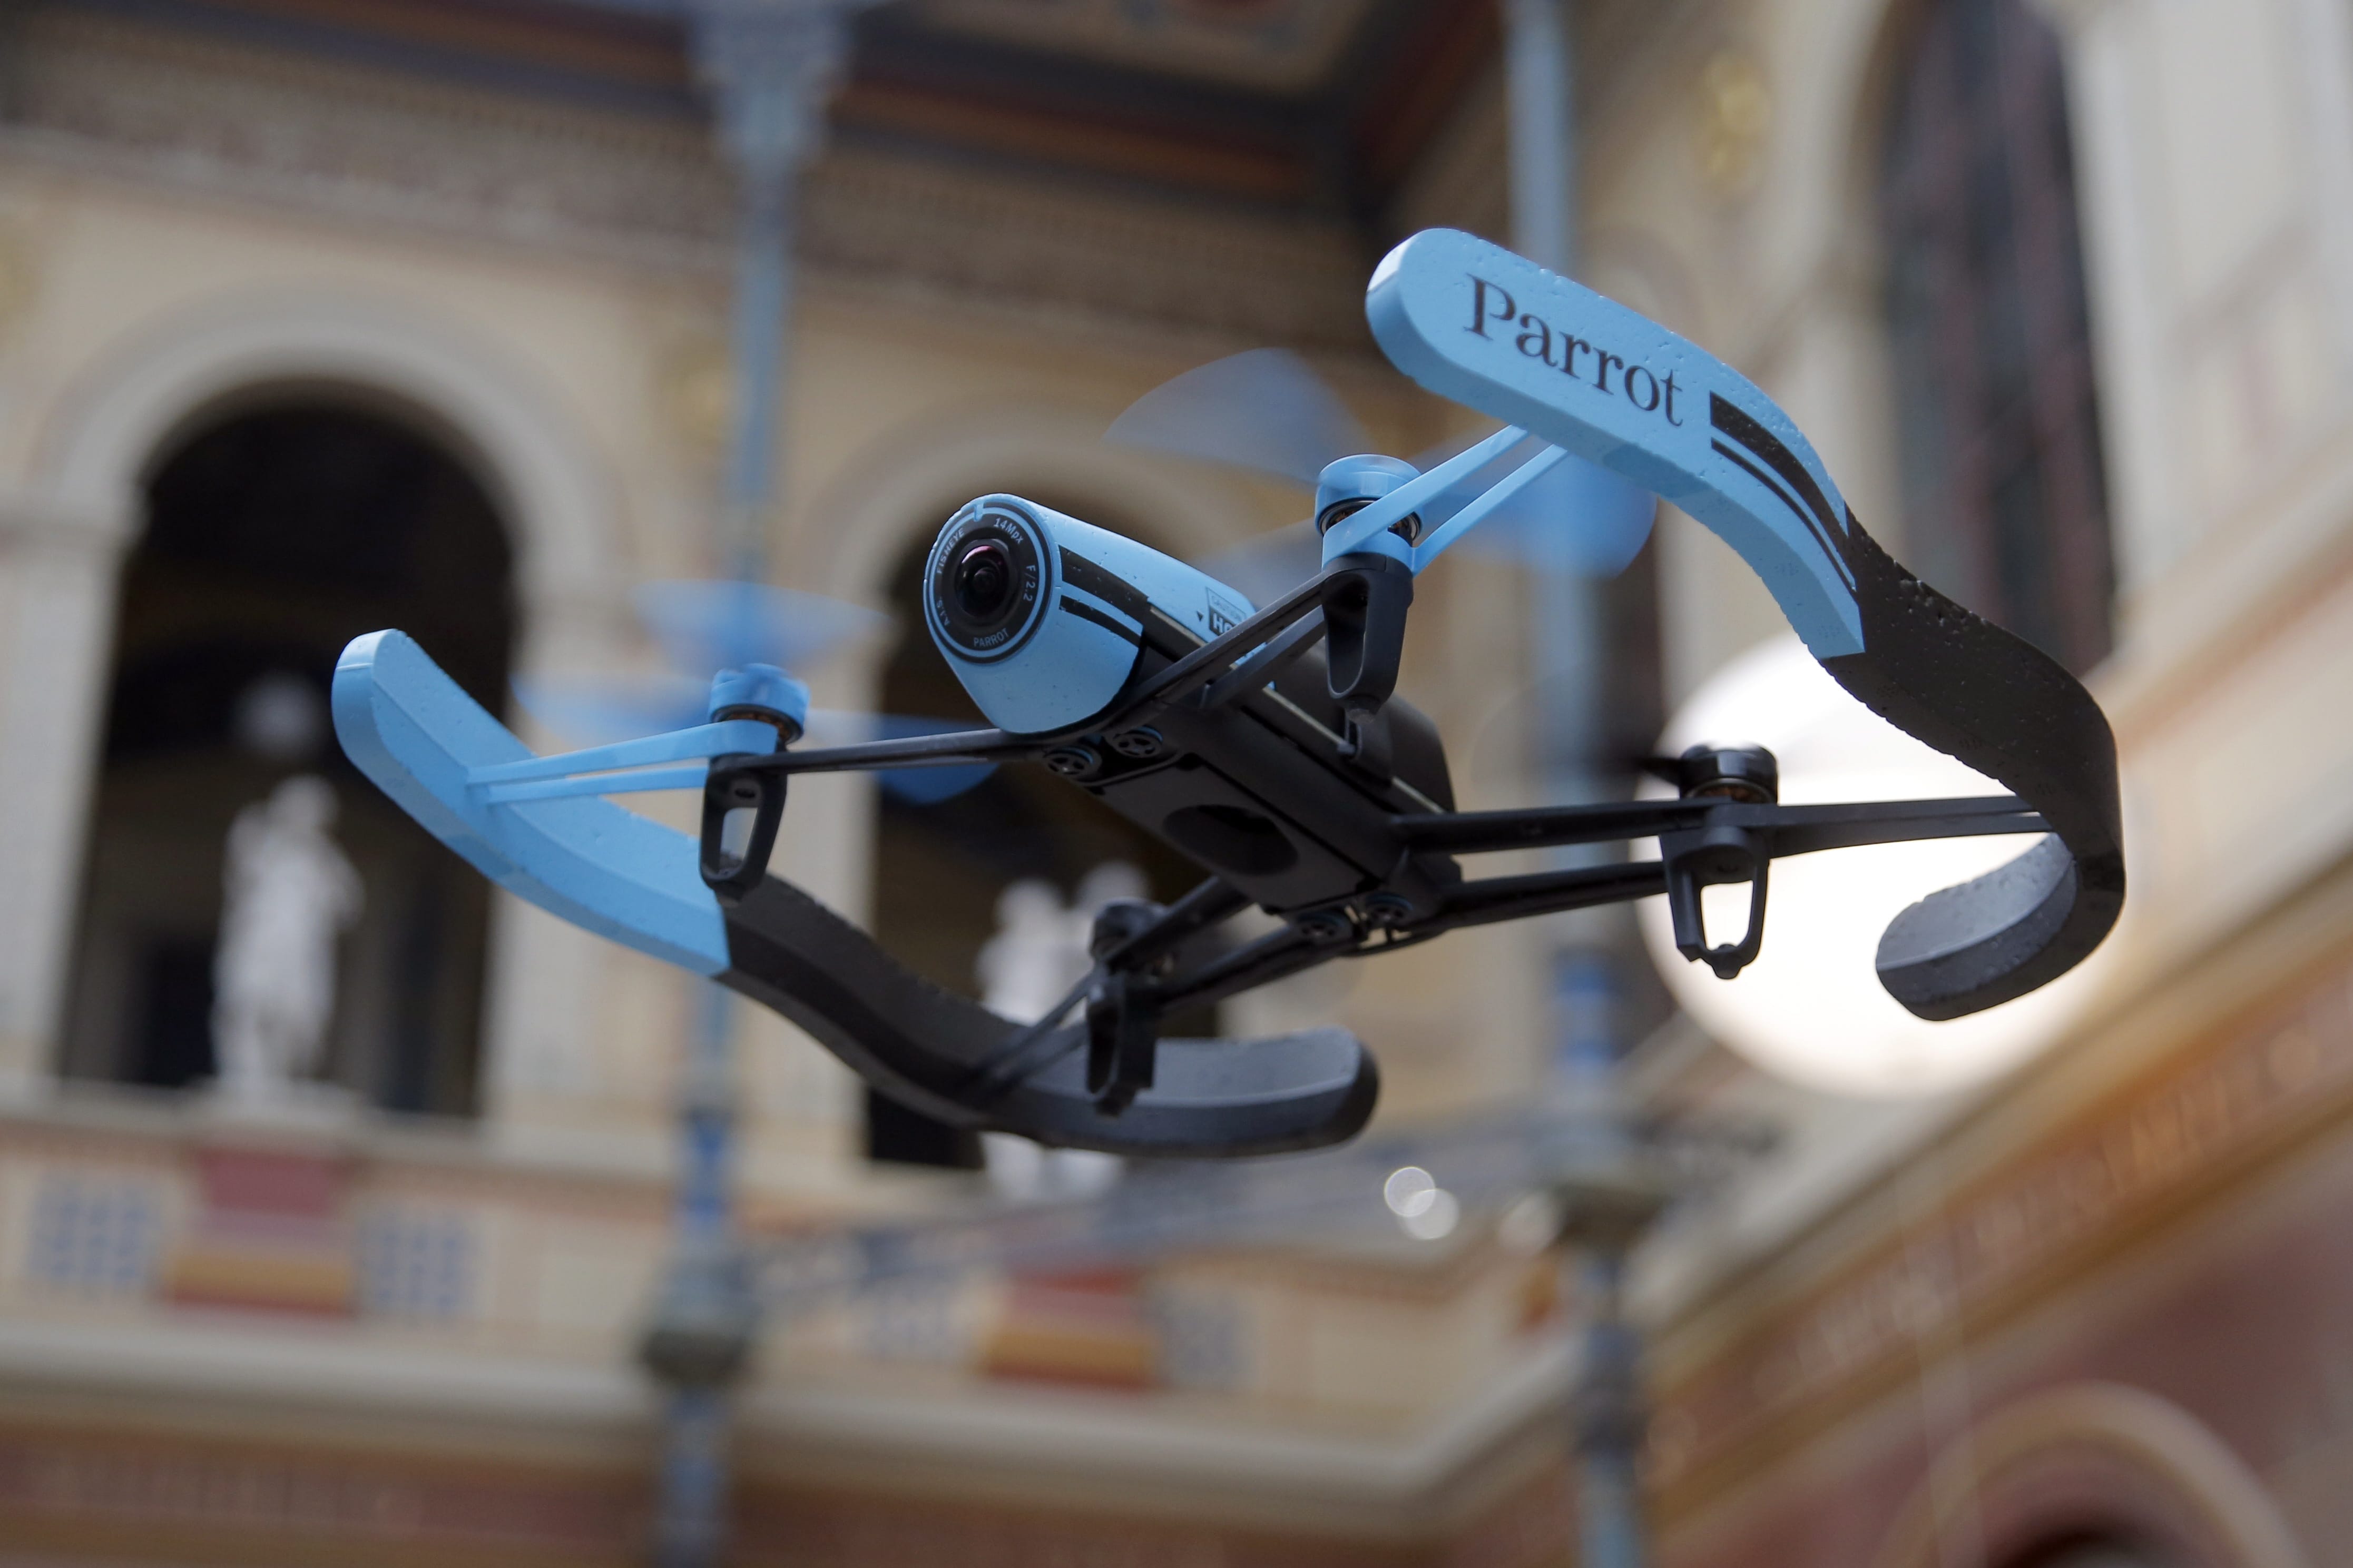 A drone flies during a November presentation to the press in Paris, France.